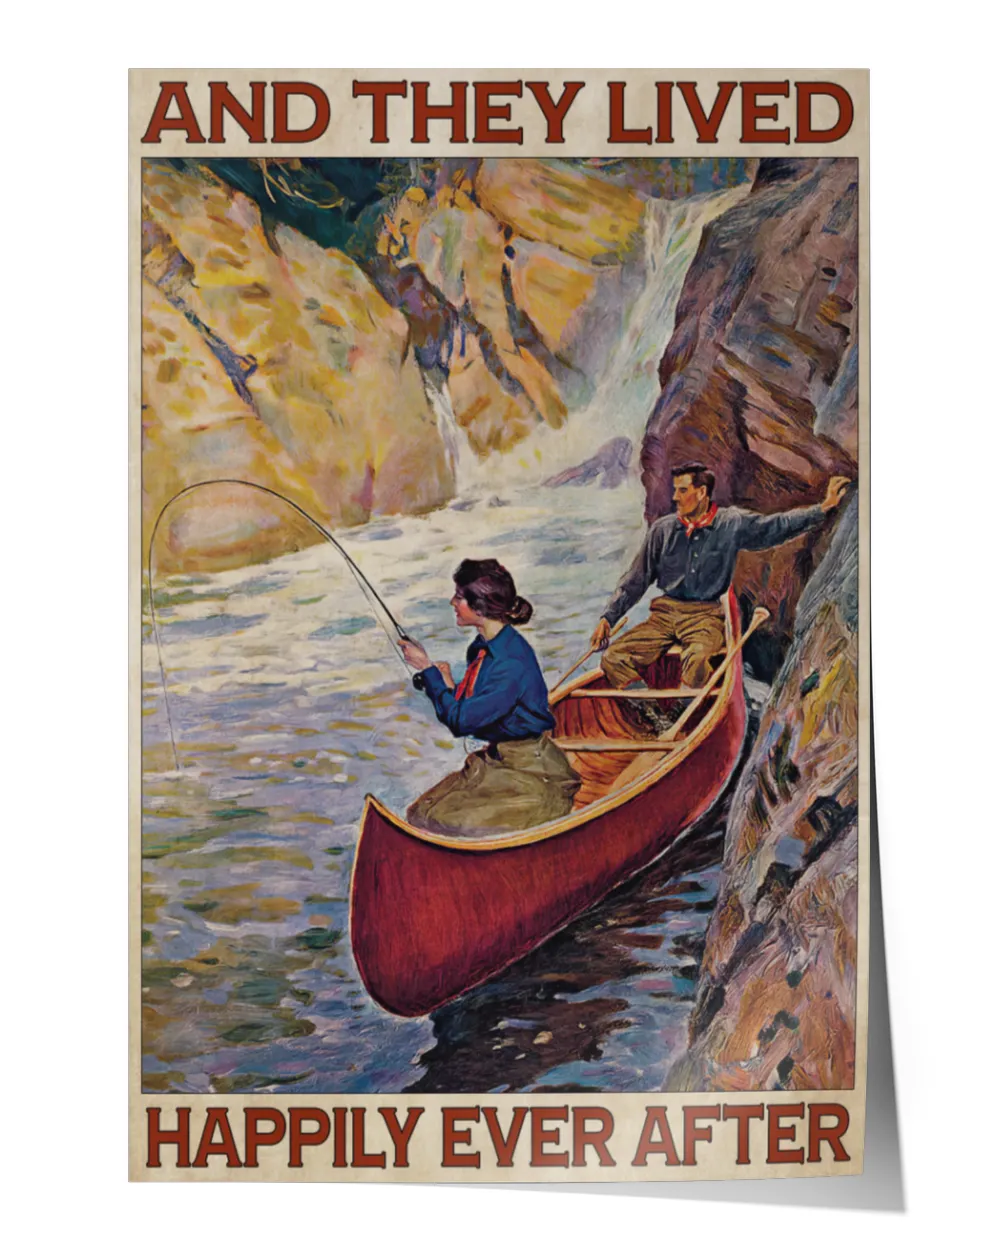 couple angling and they lived happily ever after home decor wall vertical poster ideal gift